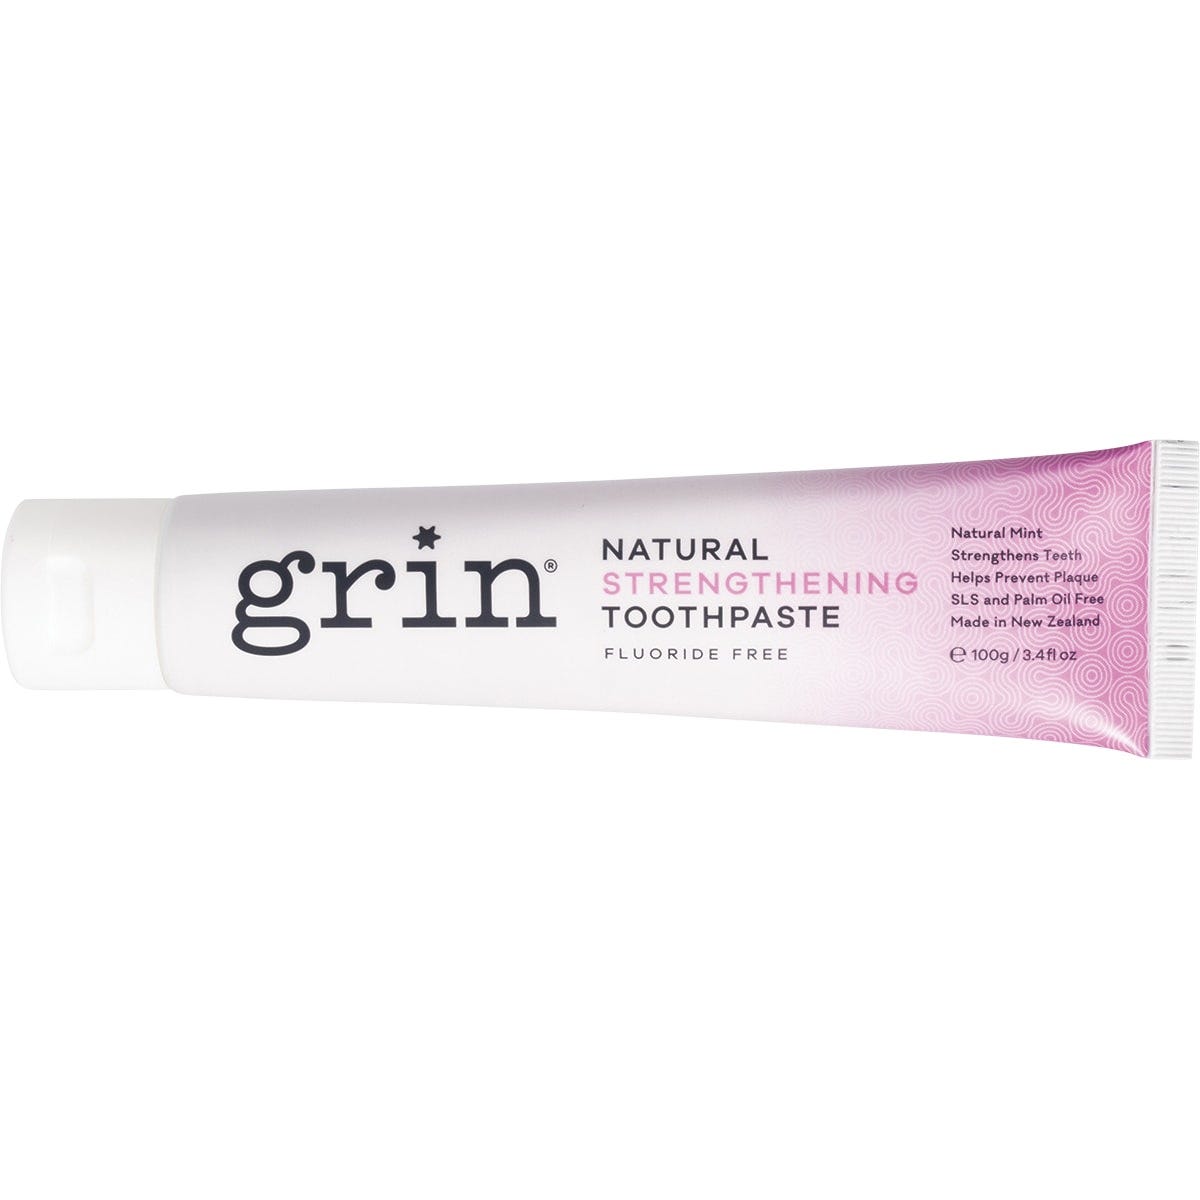 Grin Toothpaste Strengthening